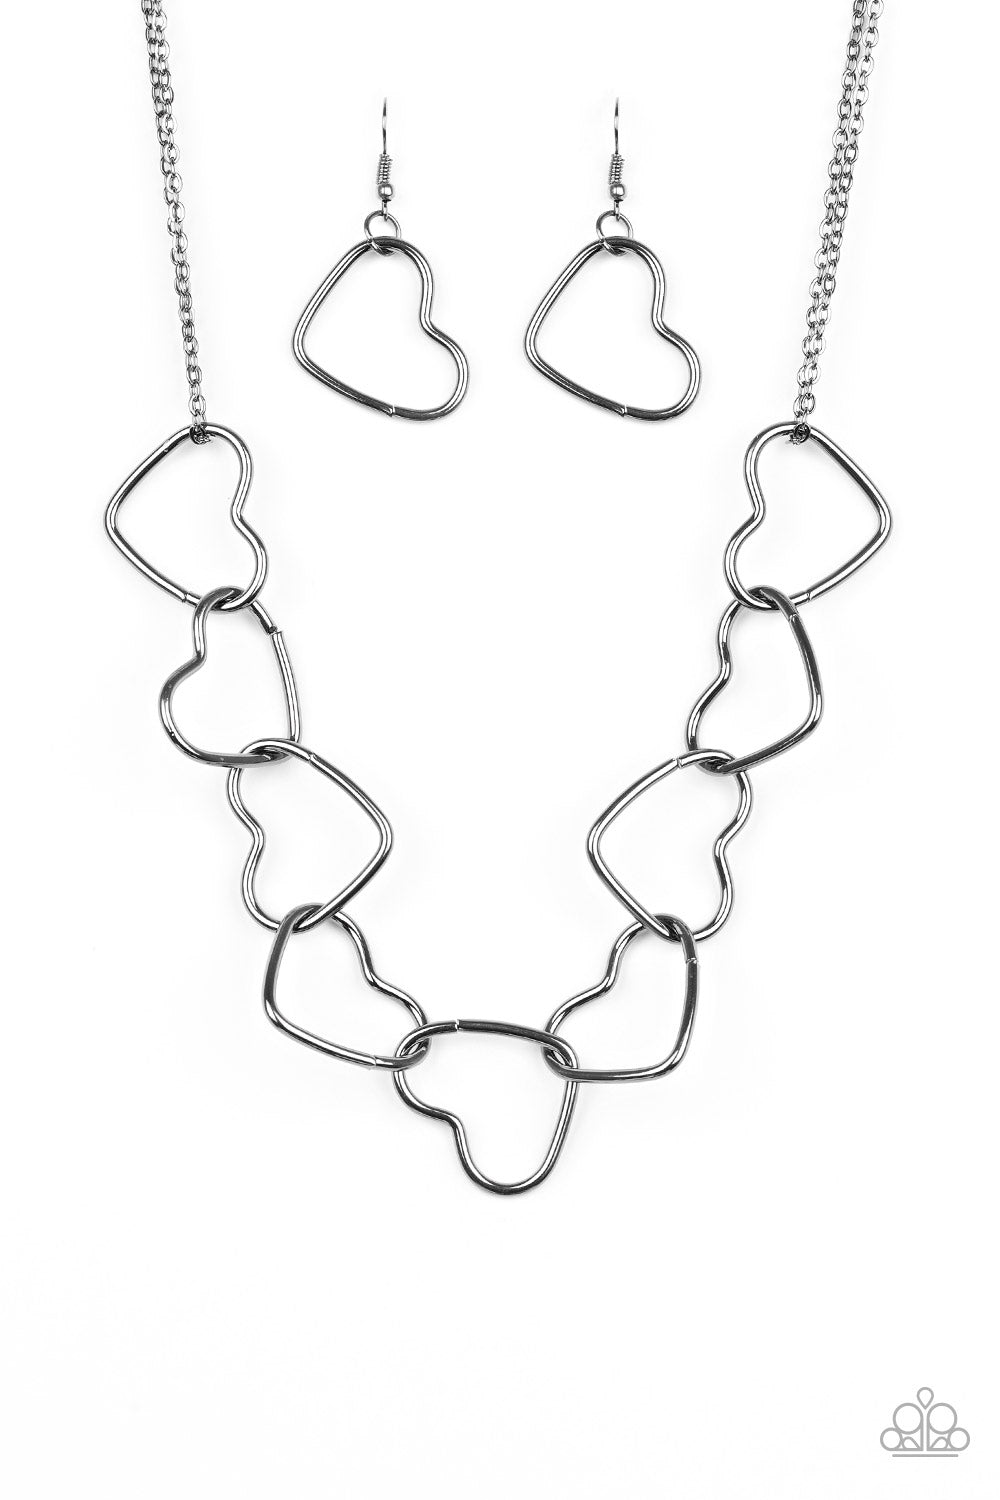 Paparazzi Unbreak My Heart - Black Necklace Airy gunmetal heart silhouettes connect below the collar for a flirtatious look. Sold as one individual black necklace. Includes one pair of matching earrings.